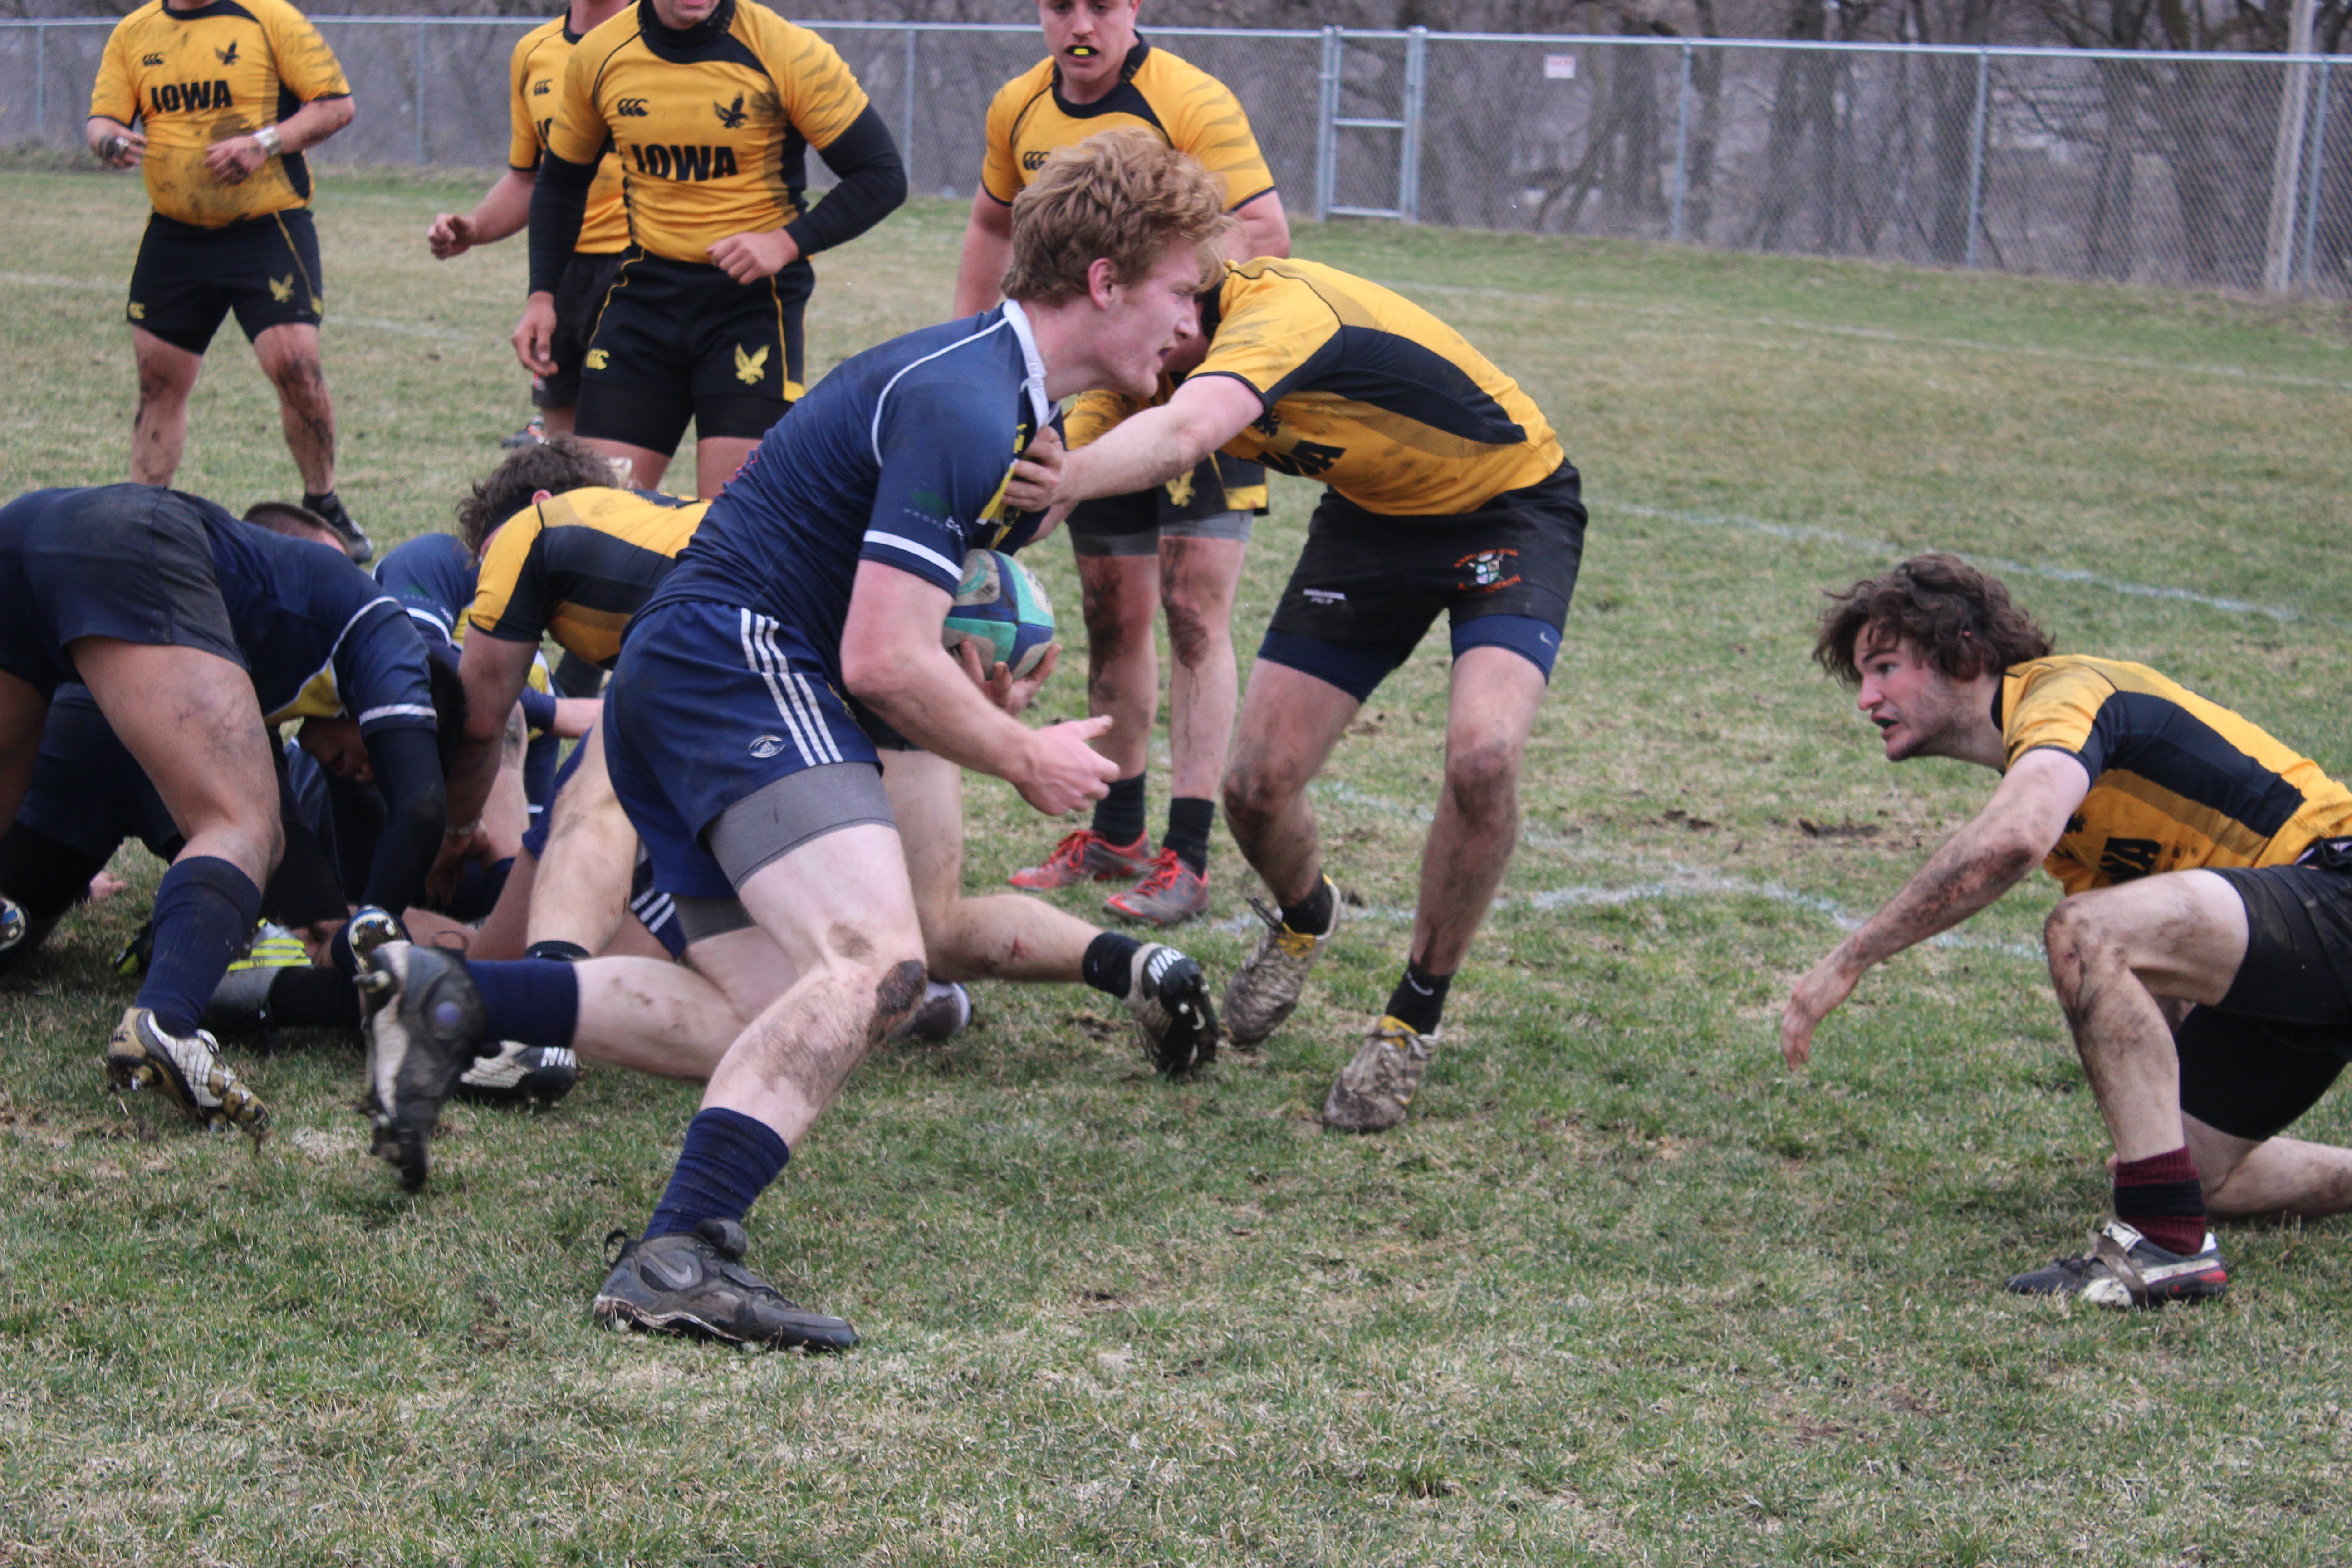 Stuart Starkweather runs with the ball near the try line.